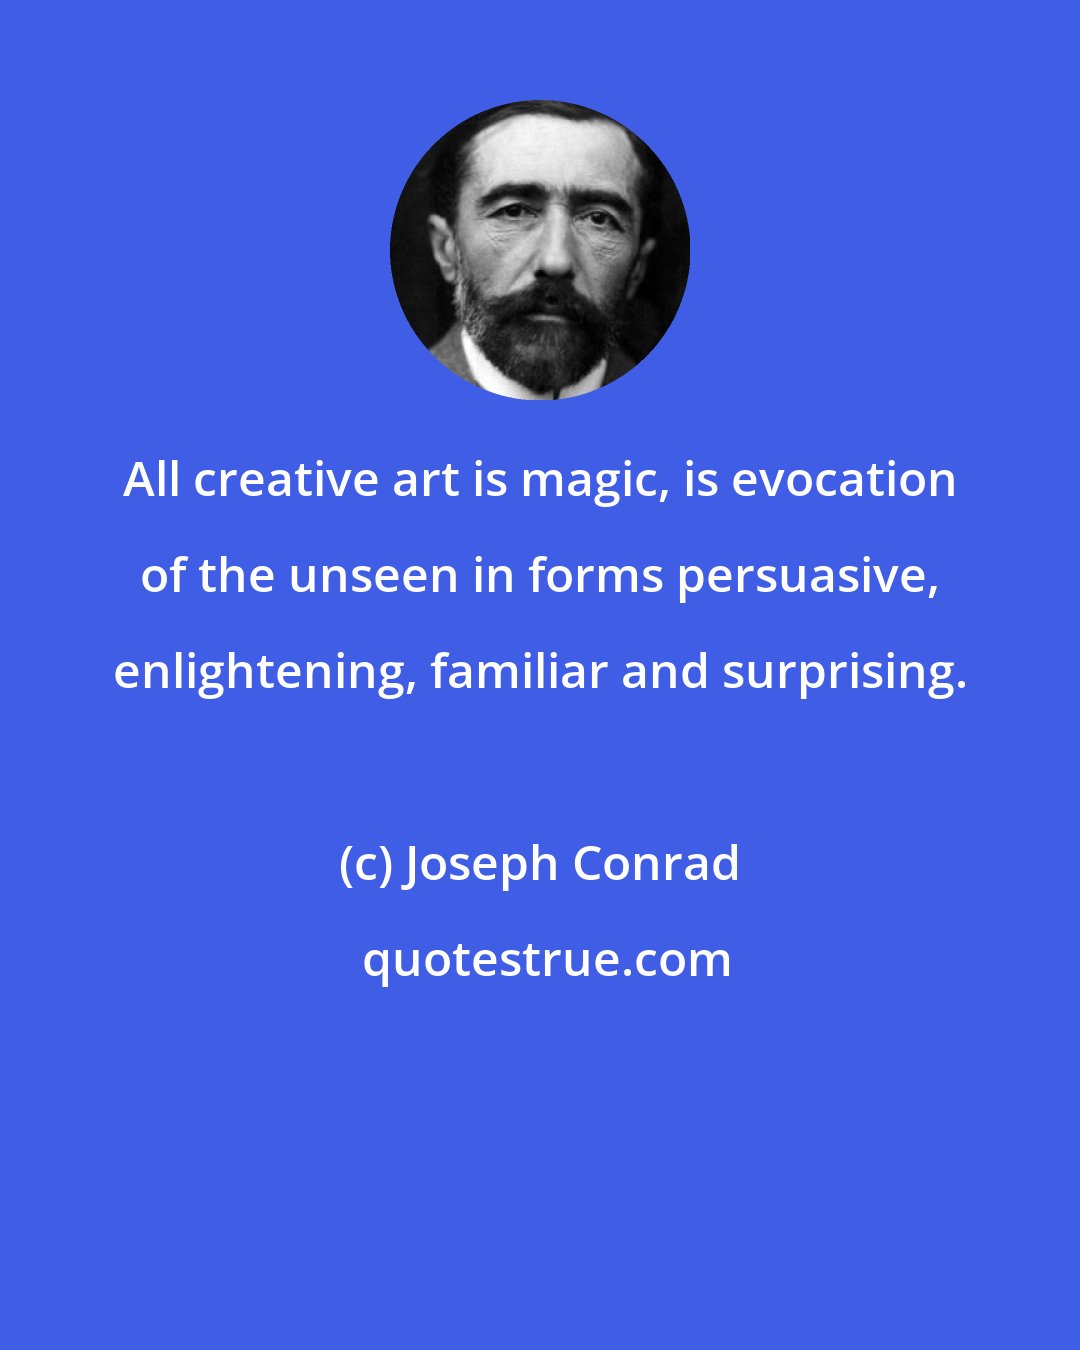 Joseph Conrad: All creative art is magic, is evocation of the unseen in forms persuasive, enlightening, familiar and surprising.